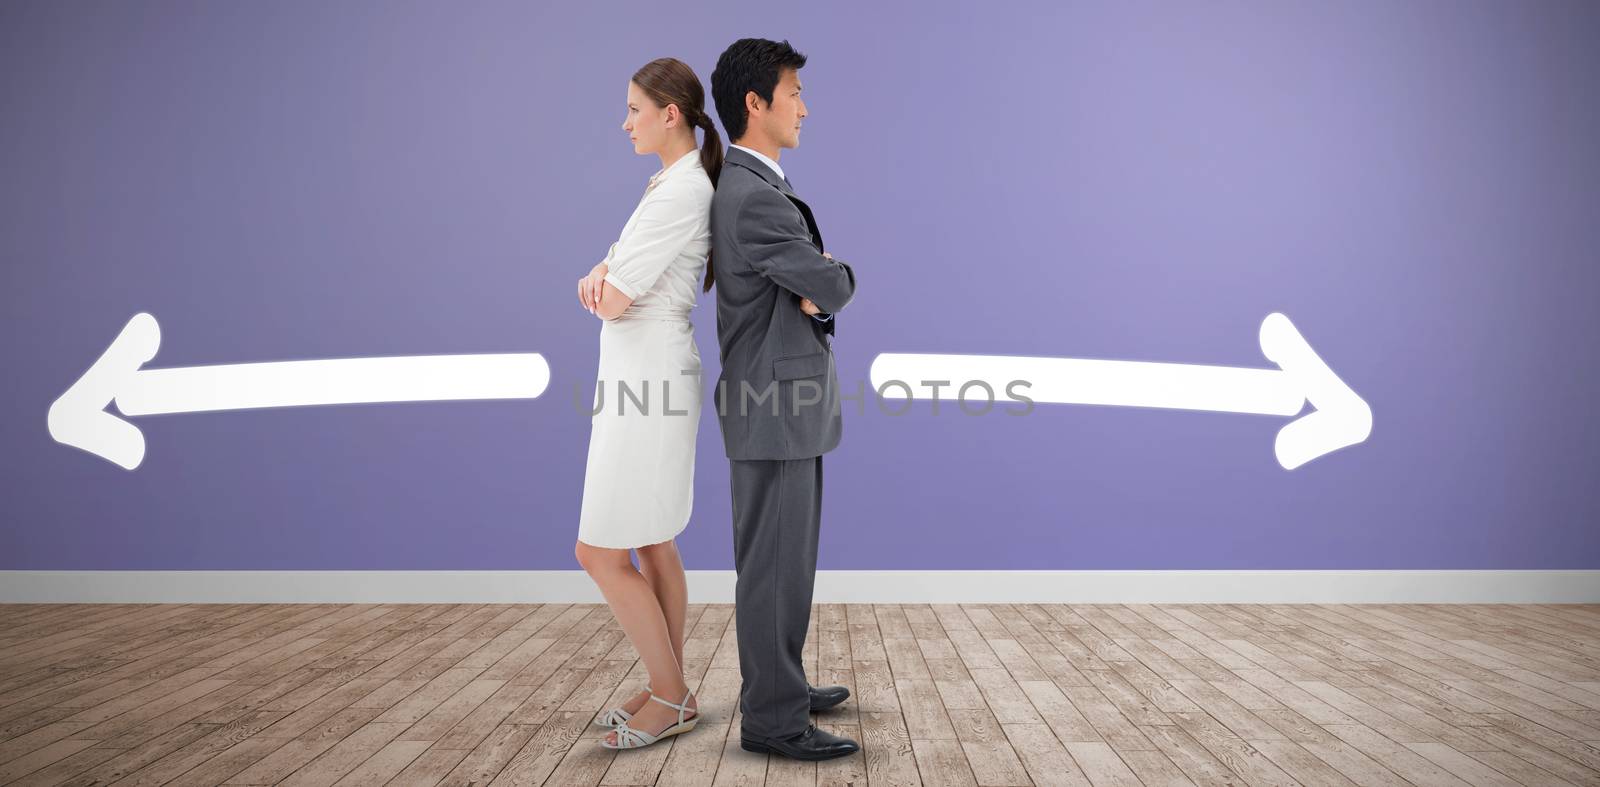 Composite image of portrait of serious business people standing back-to-back by Wavebreakmedia